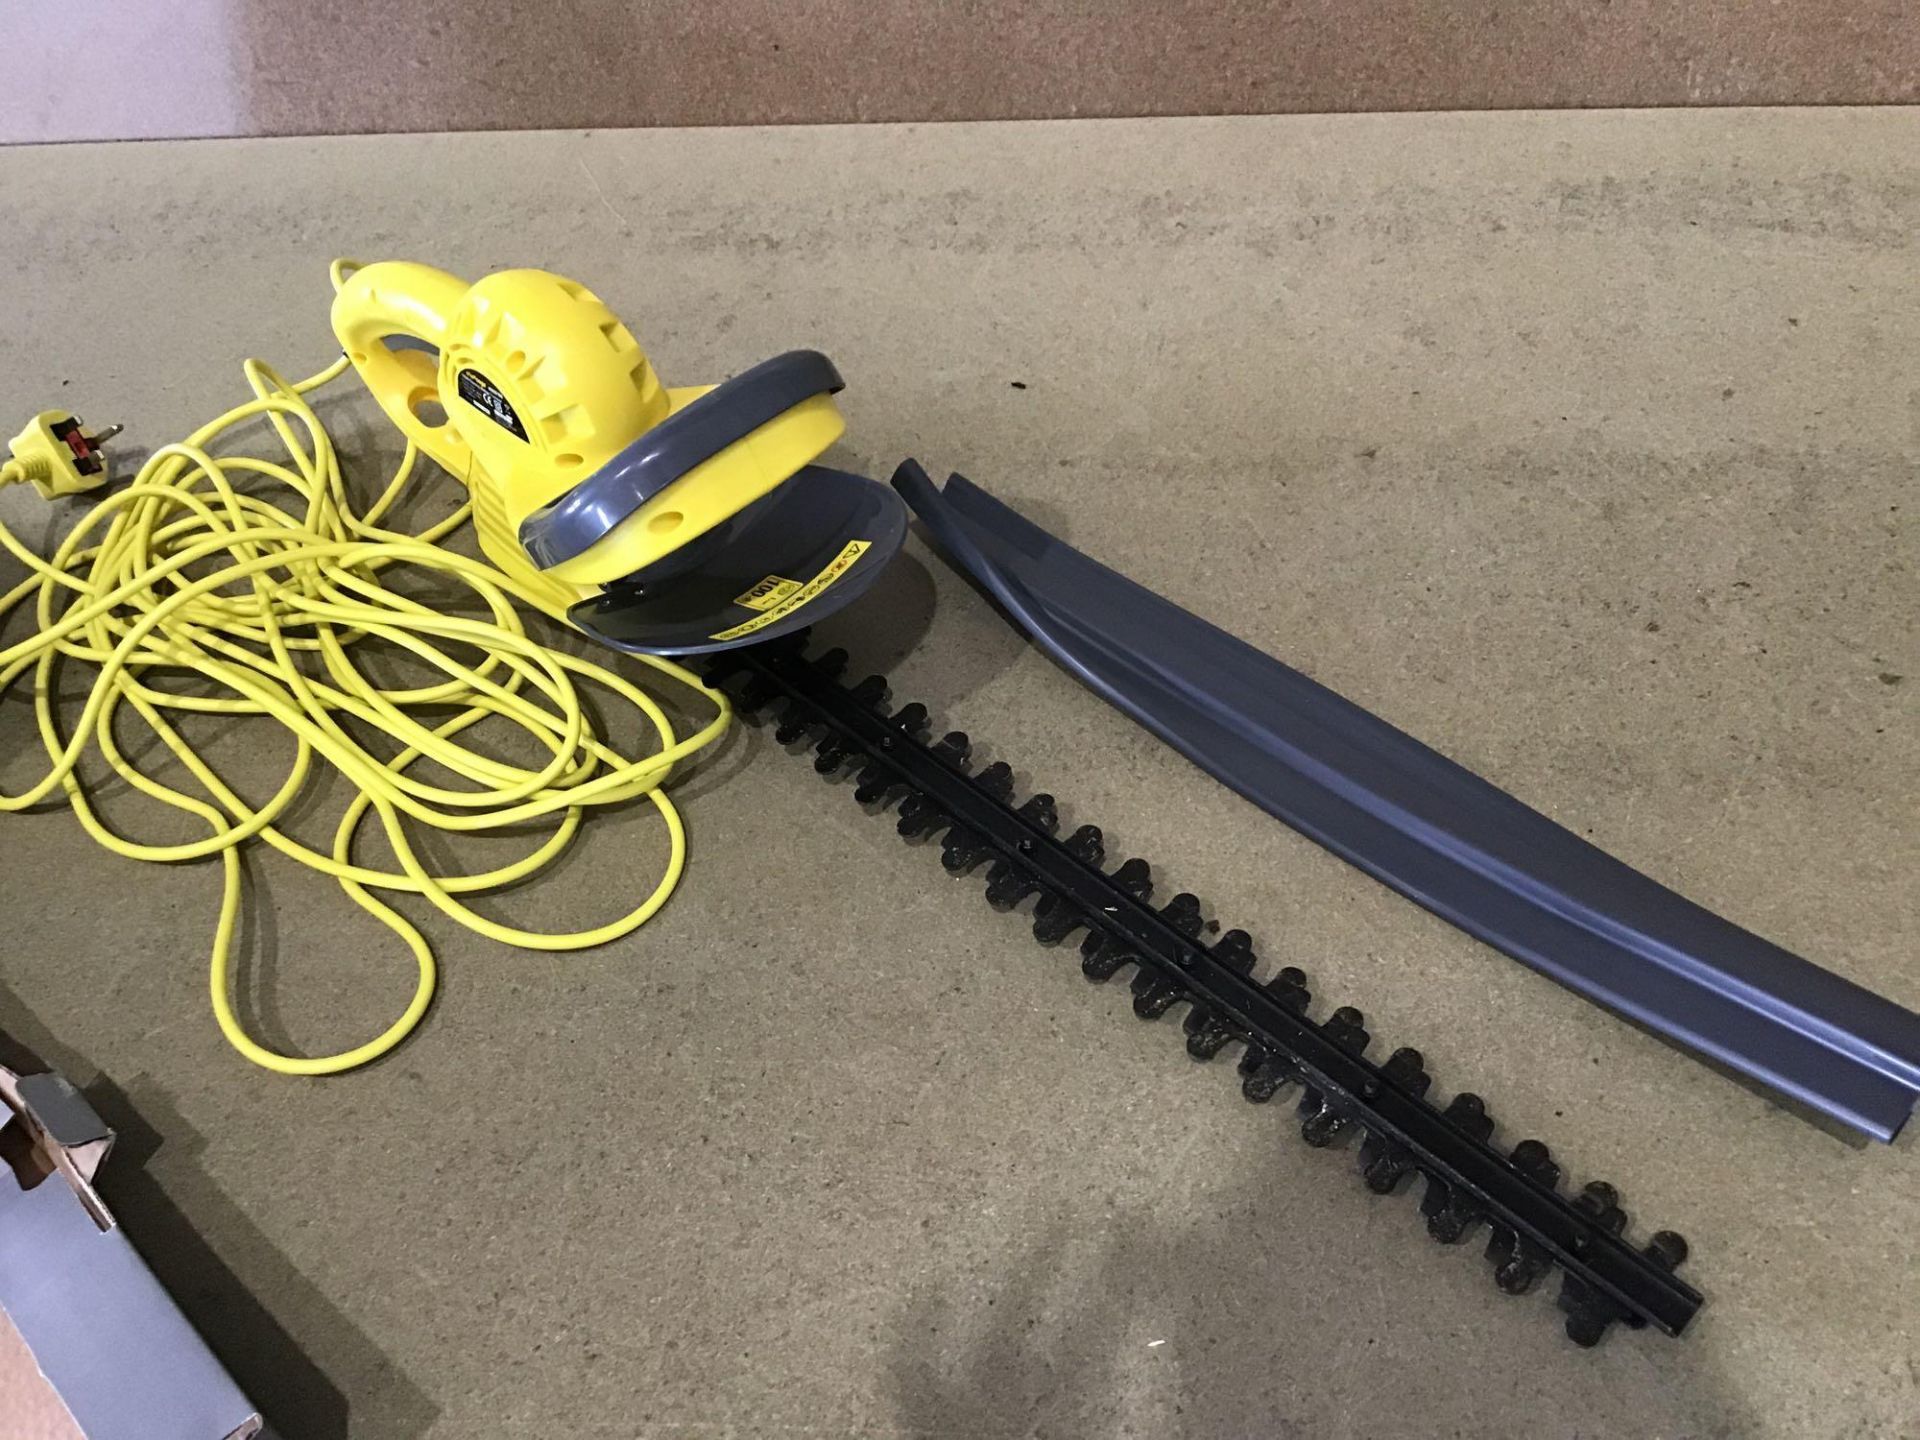 challenge 55cm corded hedge trimmer - 550w